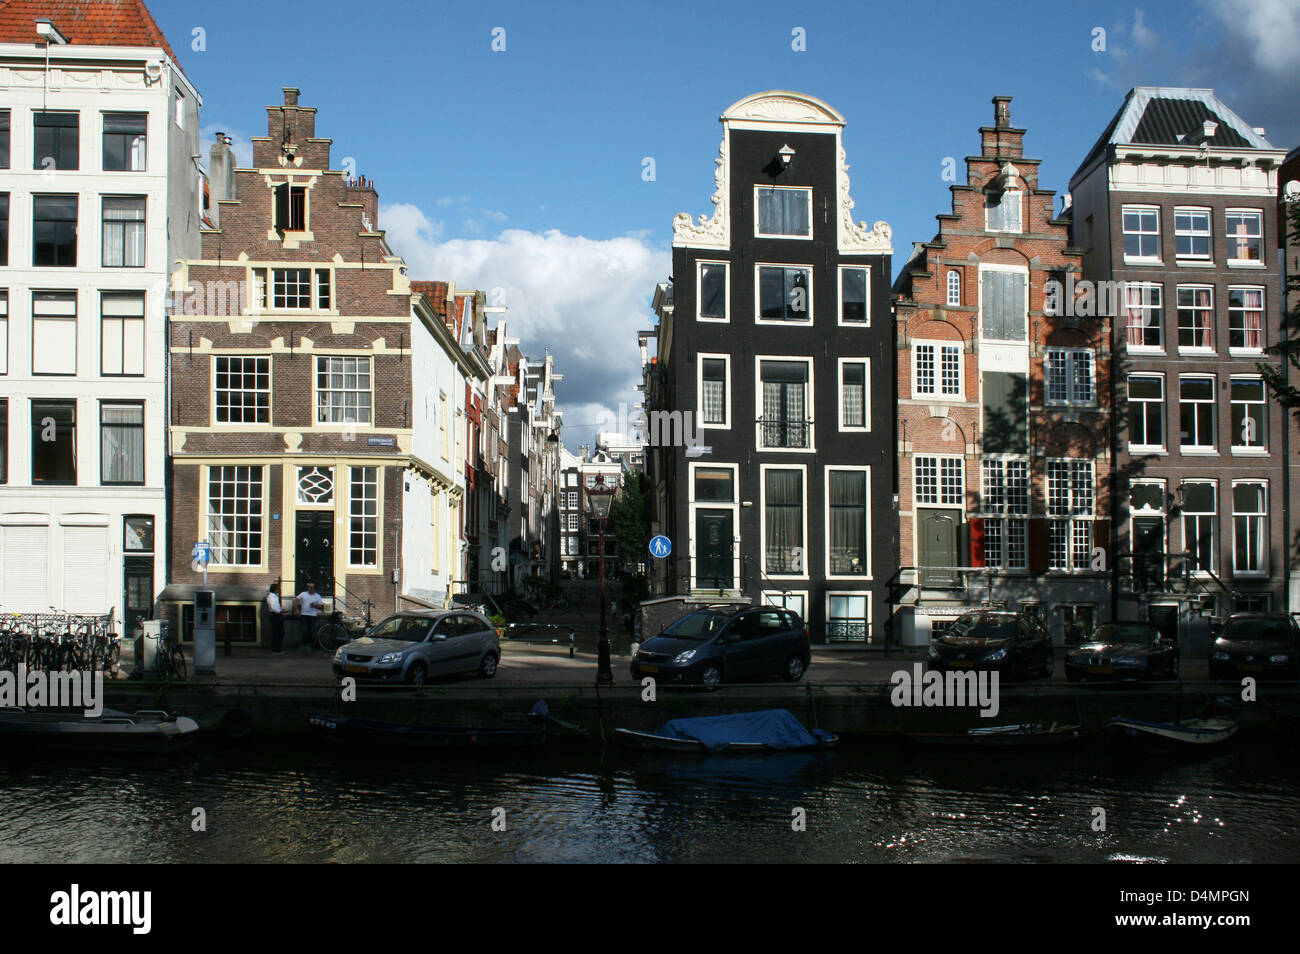 The Netherlands Holland Amsterdam Herengracht 77 Architecture Amsterdam Renaisance 1632 Canal District Golden Age Stepped Gable Stock Photo